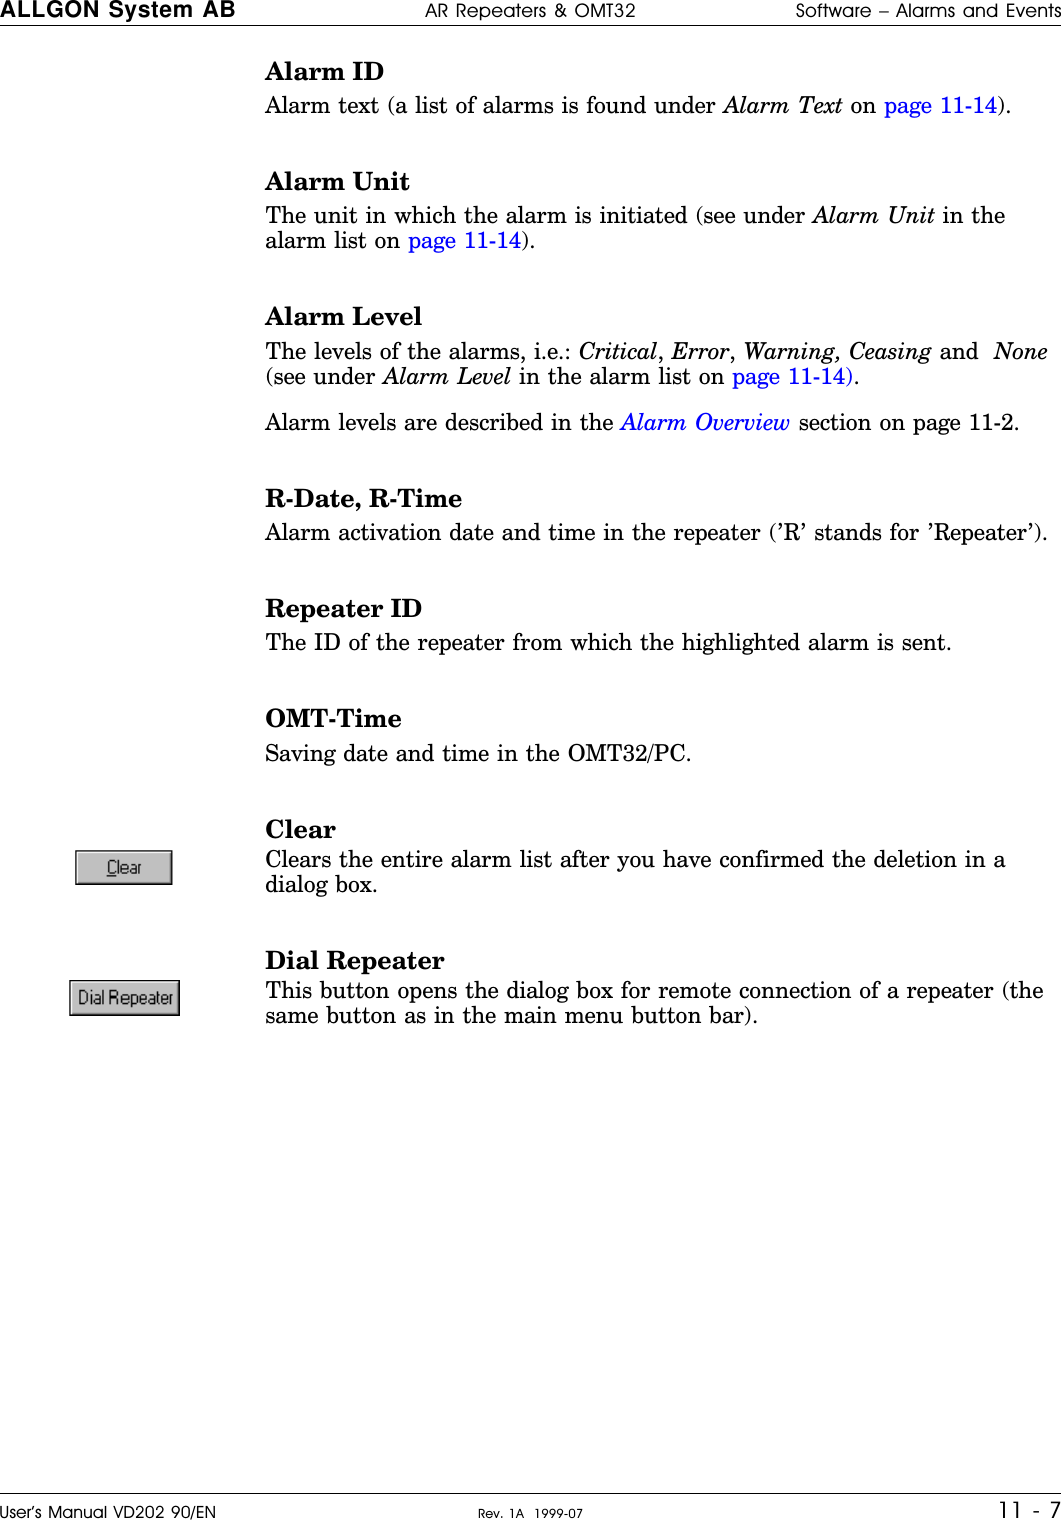 Alarm IDAlarm text (a list of alarms is found under Alarm Text on page 11-14).Alarm UnitThe unit in which the alarm is initiated (see under Alarm Unit in thealarm list on page 11-14).Alarm LevelThe levels of the alarms, i.e.: Critical, Error, Warning, Ceasing and  None(see under Alarm Level in the alarm list on page 11-14).Alarm levels are described in the Alarm Overview section on page 11-2.R-Date, R-TimeAlarm activation date and time in the repeater (’R’ stands for ’Repeater’).Repeater IDThe ID of the repeater from which the highlighted alarm is sent.OMT-TimeSaving date and time in the OMT32/PC.ClearClears the entire alarm list after you have confirmed the deletion in adialog box.Dial RepeaterThis button opens the dialog box for remote connection of a repeater (thesame button as in the main menu button bar).ALLGON System AB AR Repeaters &amp; OMT32 Software – Alarms and EventsUser’s Manual VD202 90/EN Rev. 1A  1999-07 11 - 7